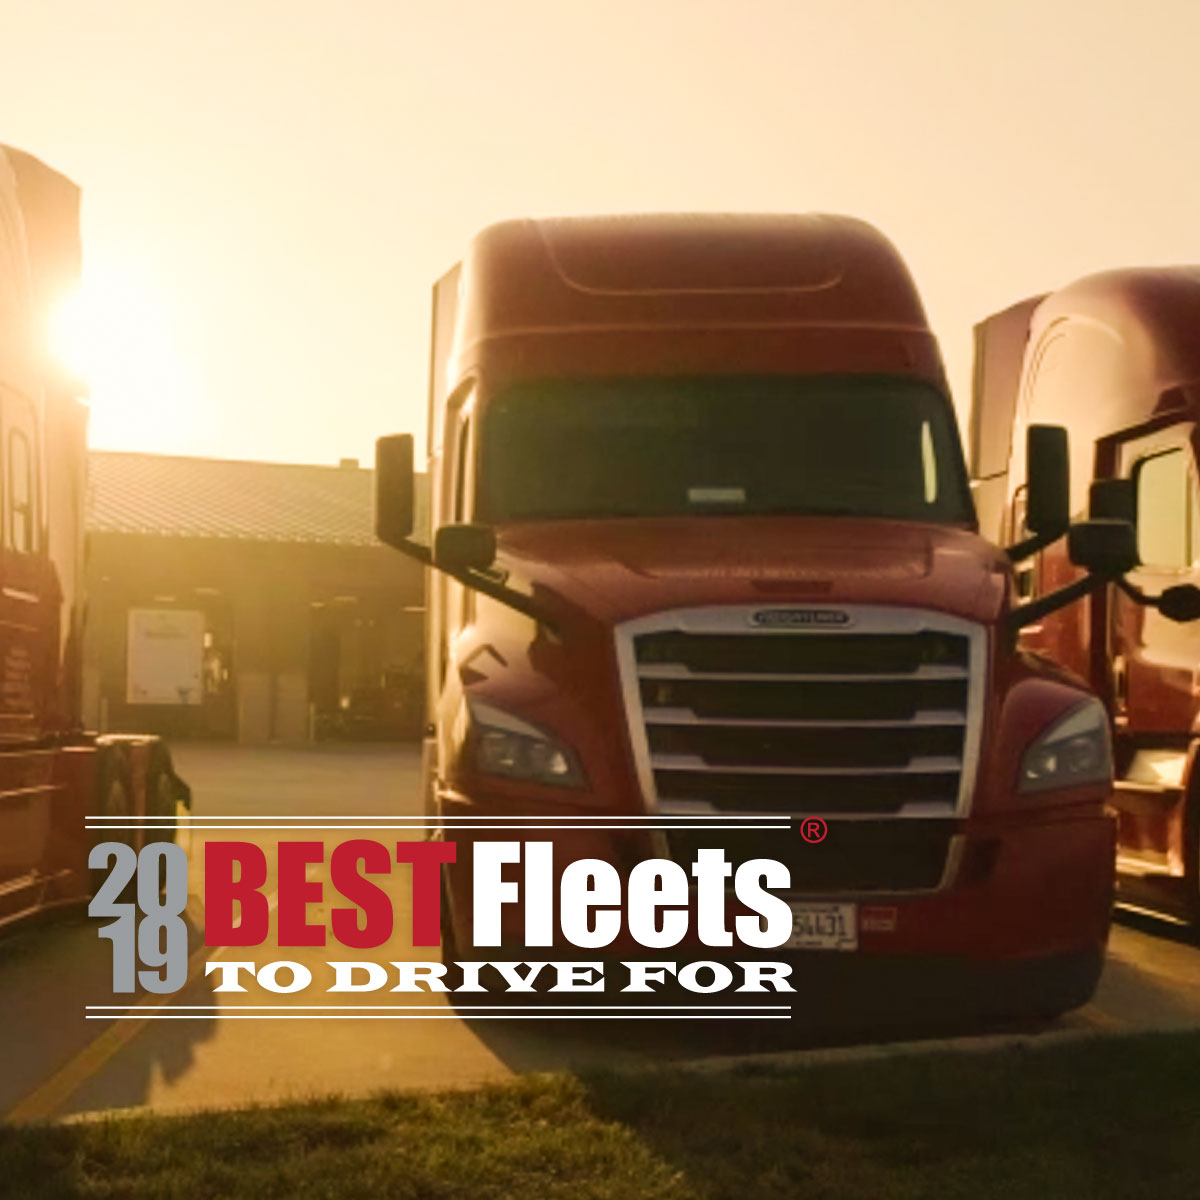 Nussbaum Recognized as one of the 2019 Best Fleets to Drive For.